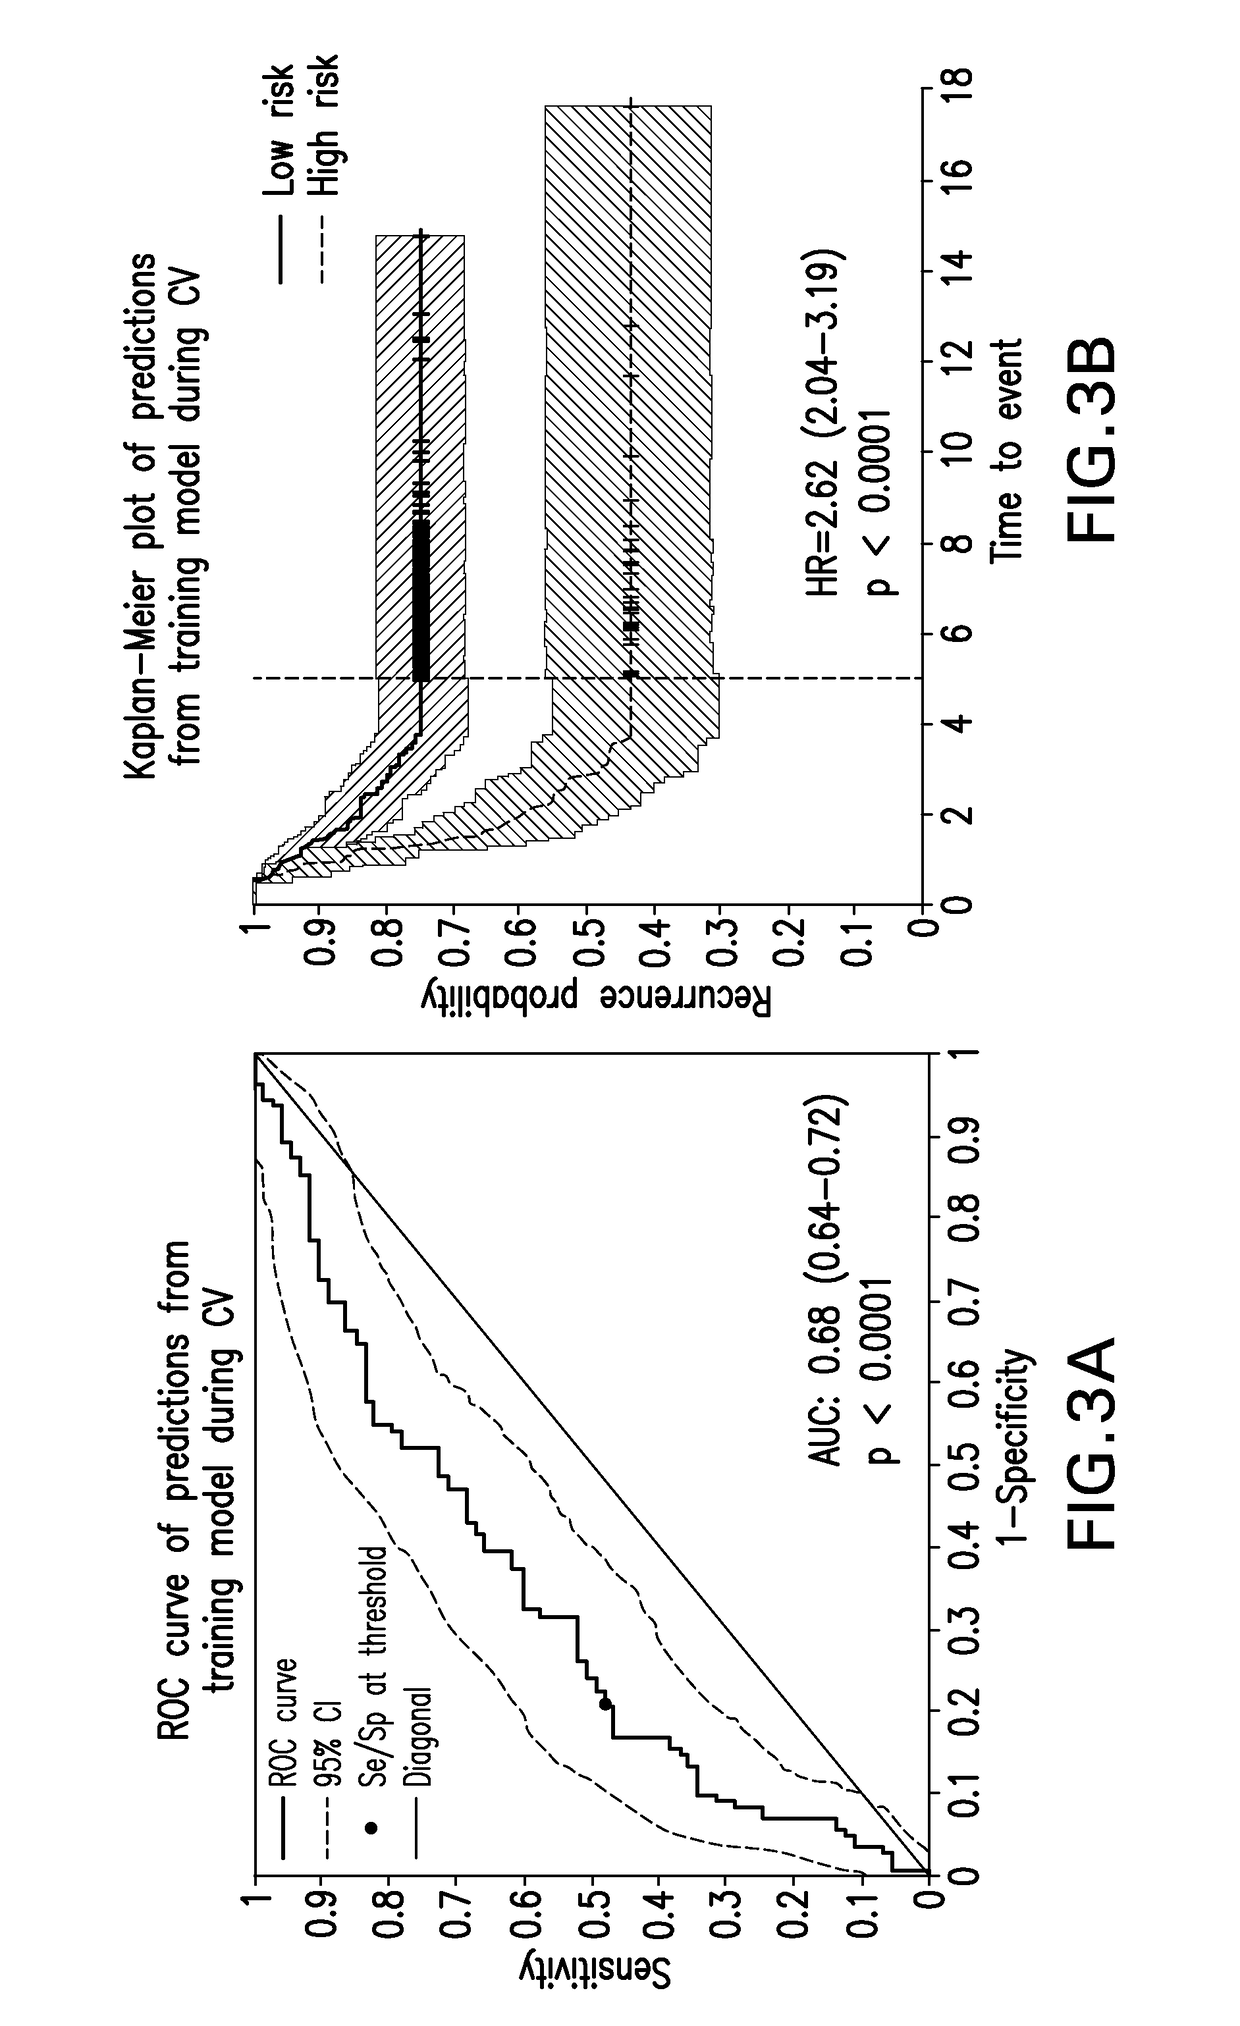 Colon cancer gene expression signatures and methods of use